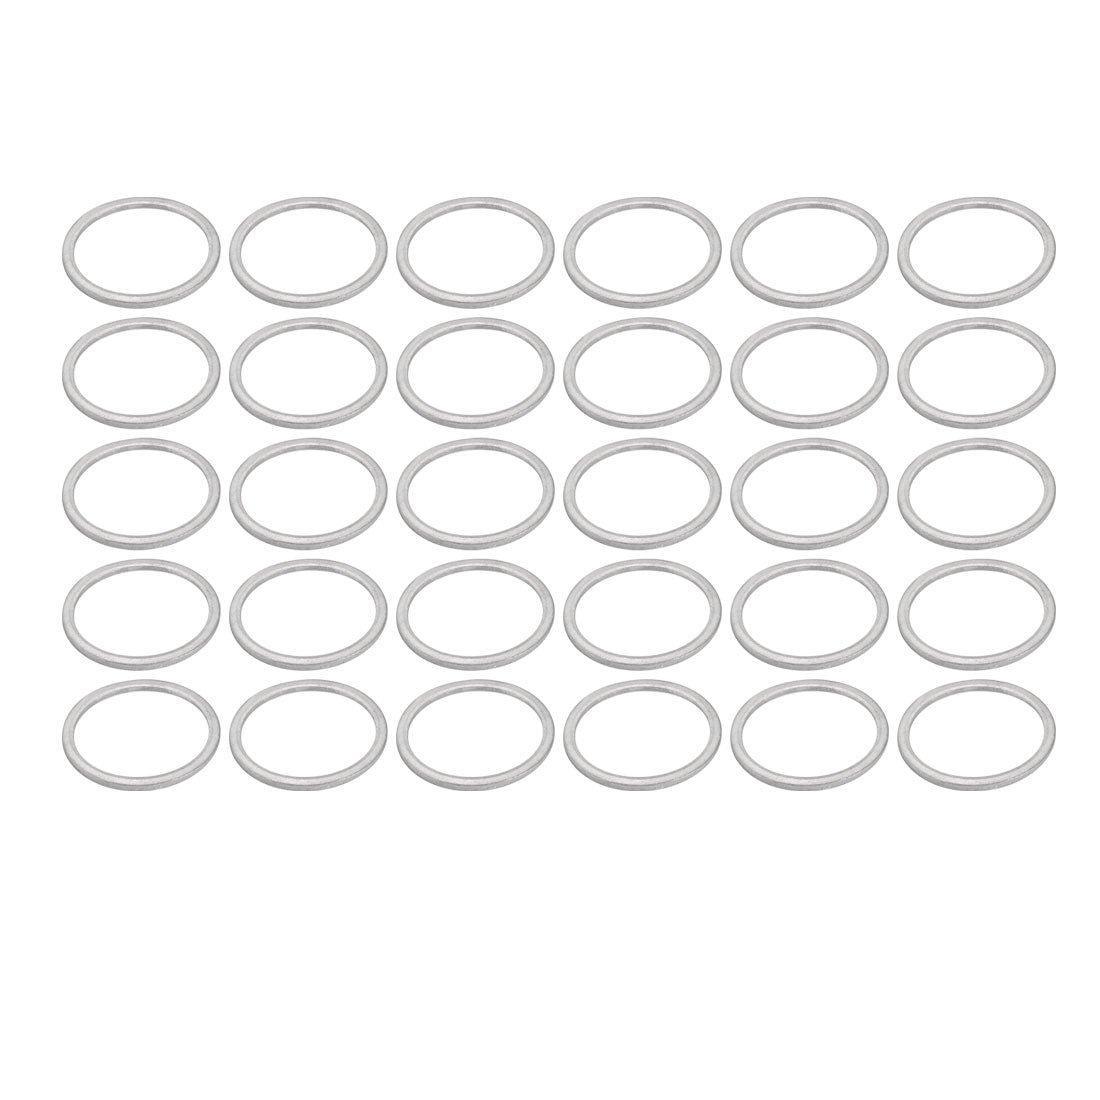 uxcell Uxcell 30Pcs 30mmx36mmx2mm Aluminum Motorcycle Hardware Drain Plug Washer